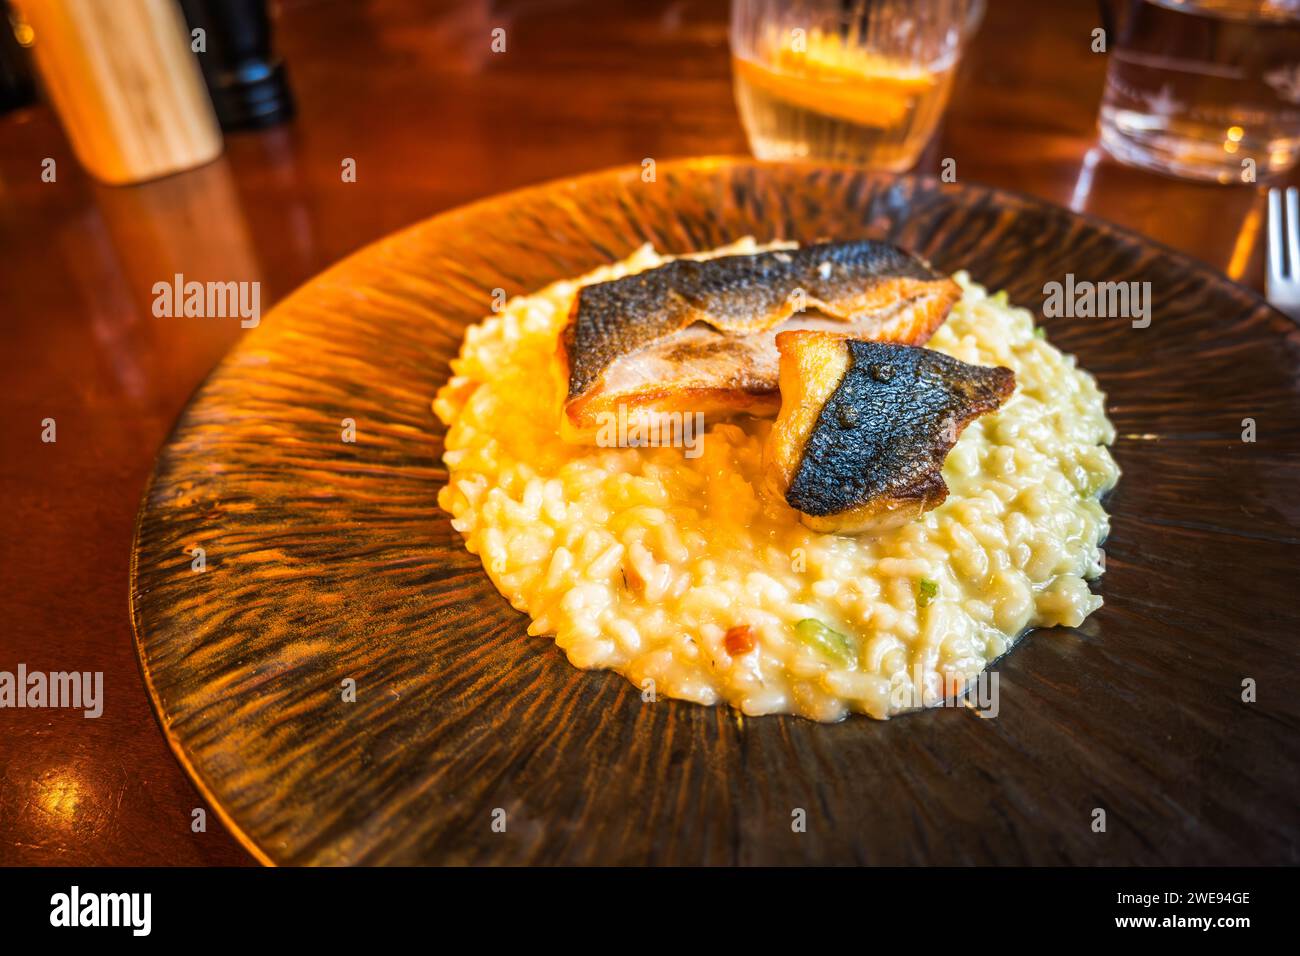 Roasted fish fillet (sea bass) on risotto with vegetable on decorative plate, drink, glass on restaurant table. Italian cuisine. Stock Photo